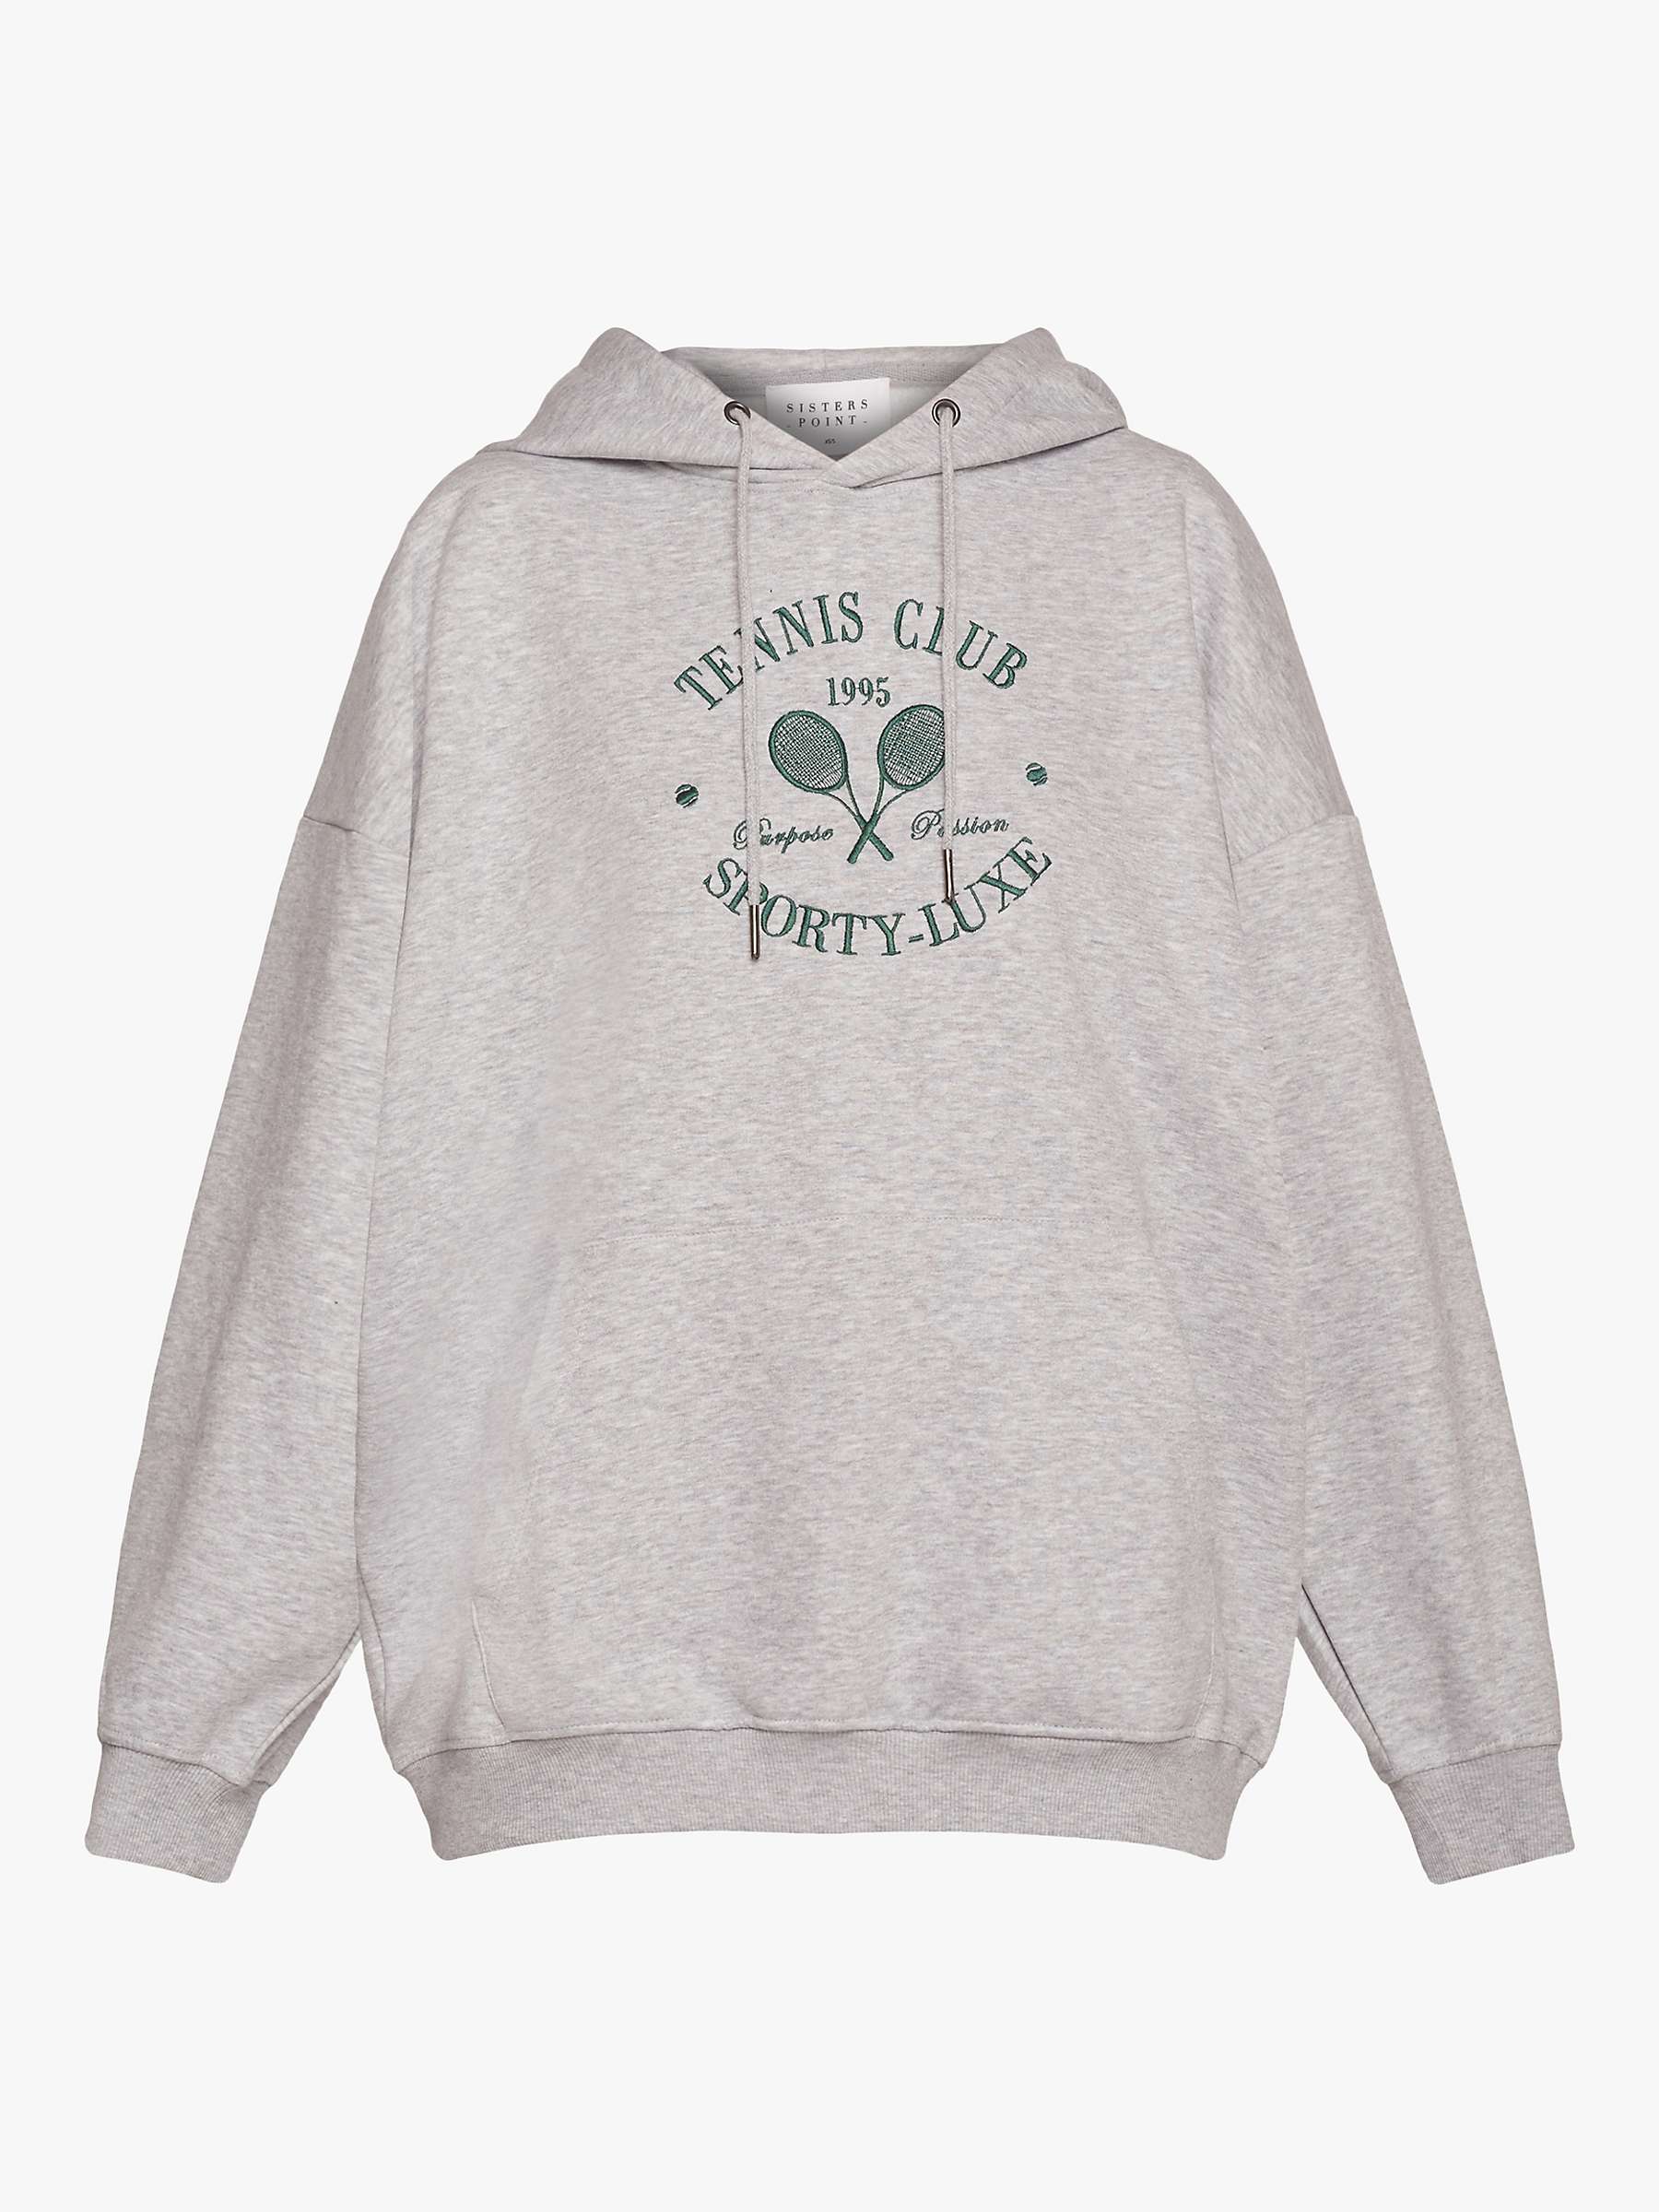 Buy Sisters Point Oversized Fit Hoodie, Grey Online at johnlewis.com